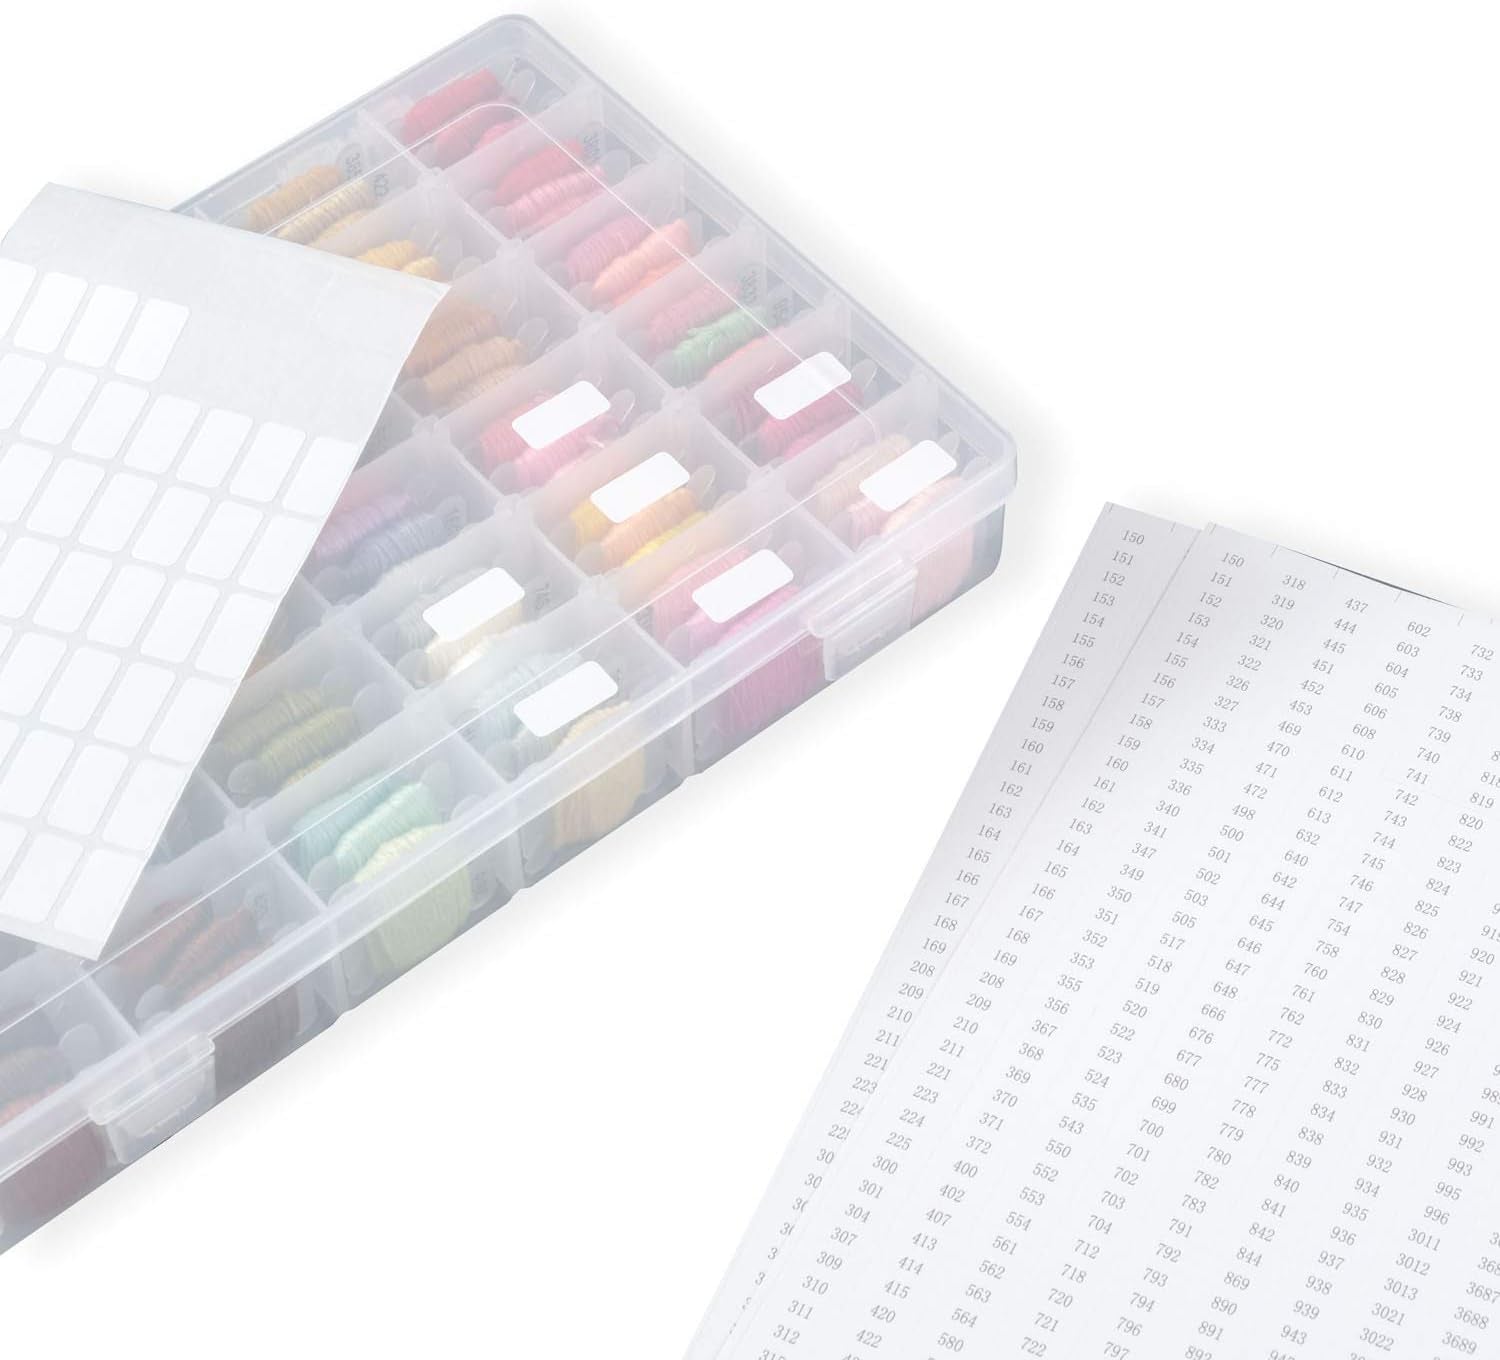 120 Pieces Plastic Floss Bobbins with 36 Grids Embroidery Floss Cross Stitch Organizer Box, White